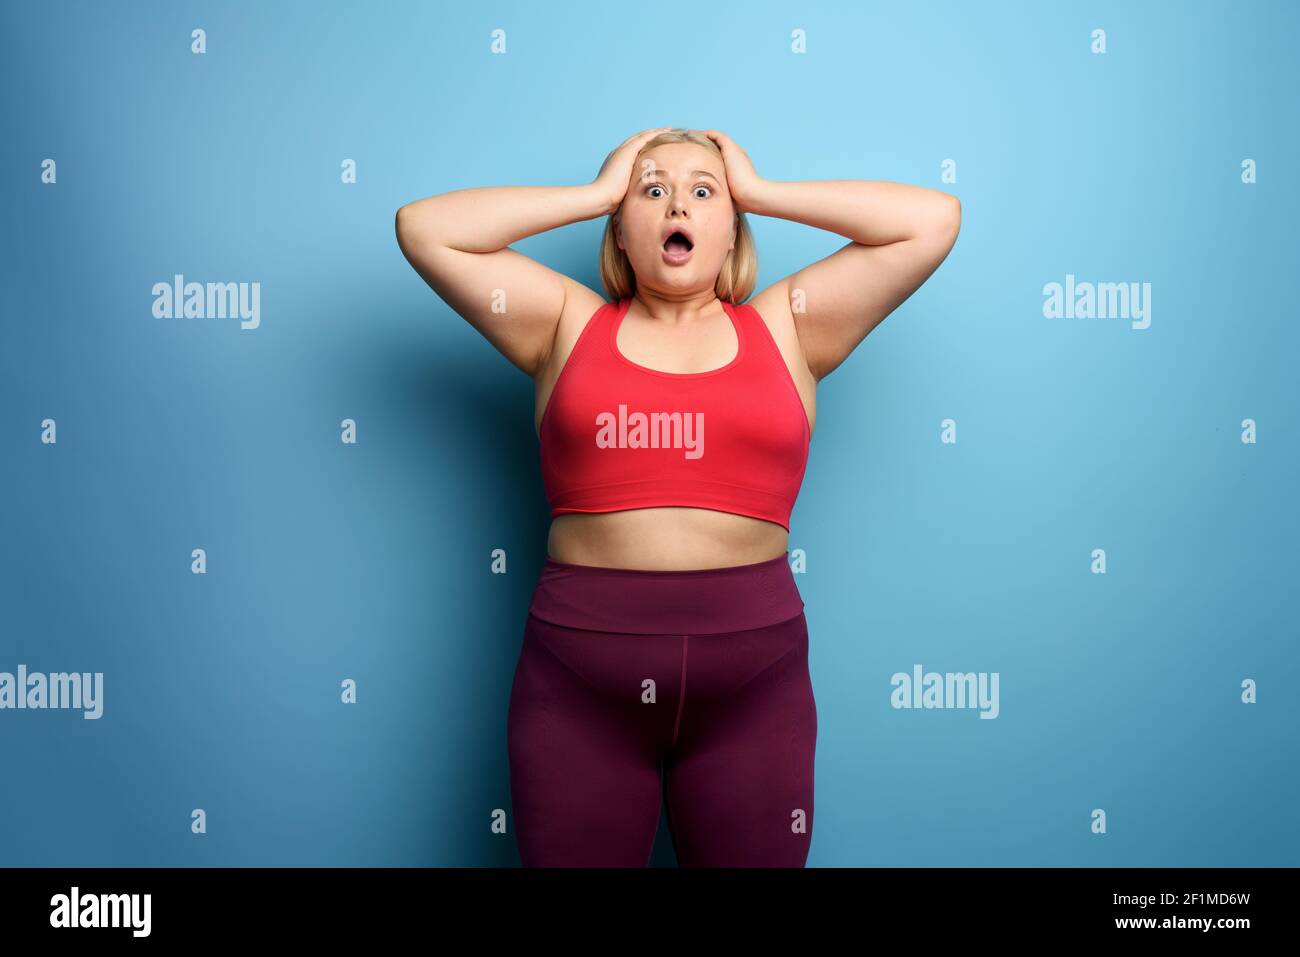 Fat girl in fitness suite wants to start a diet but has some. Cyan background Stock Photo